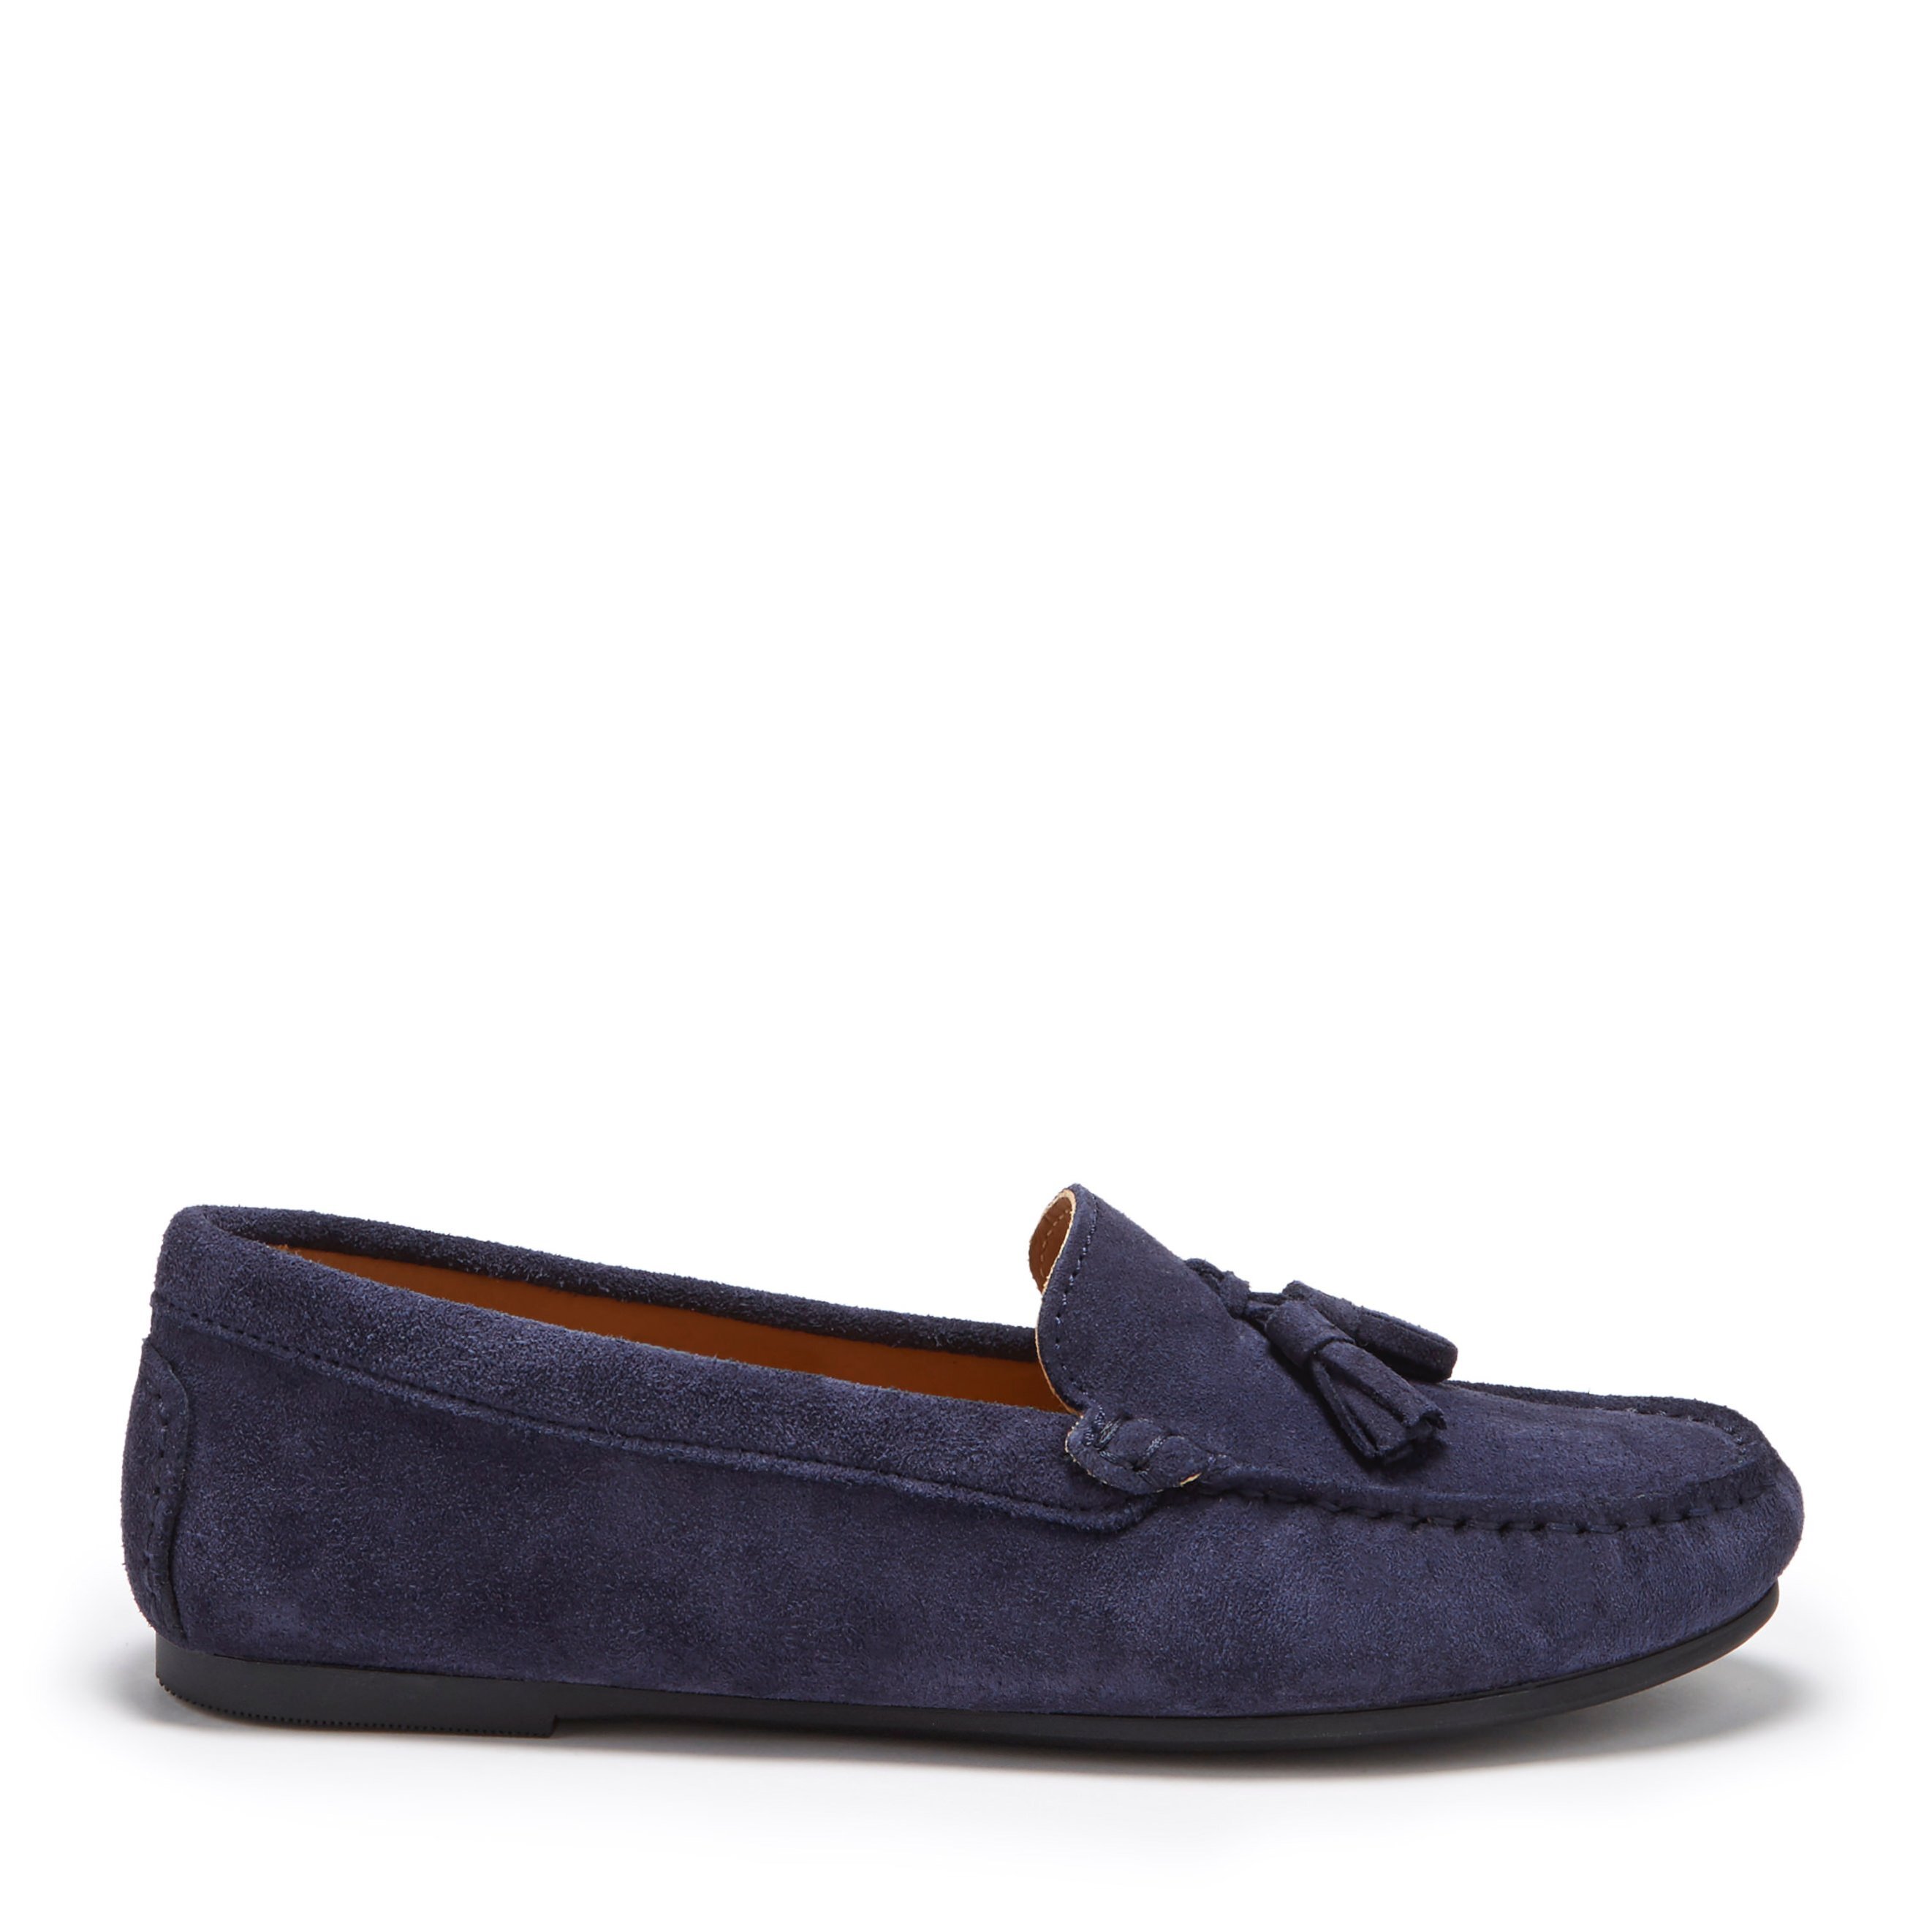 navy suede shoes women's